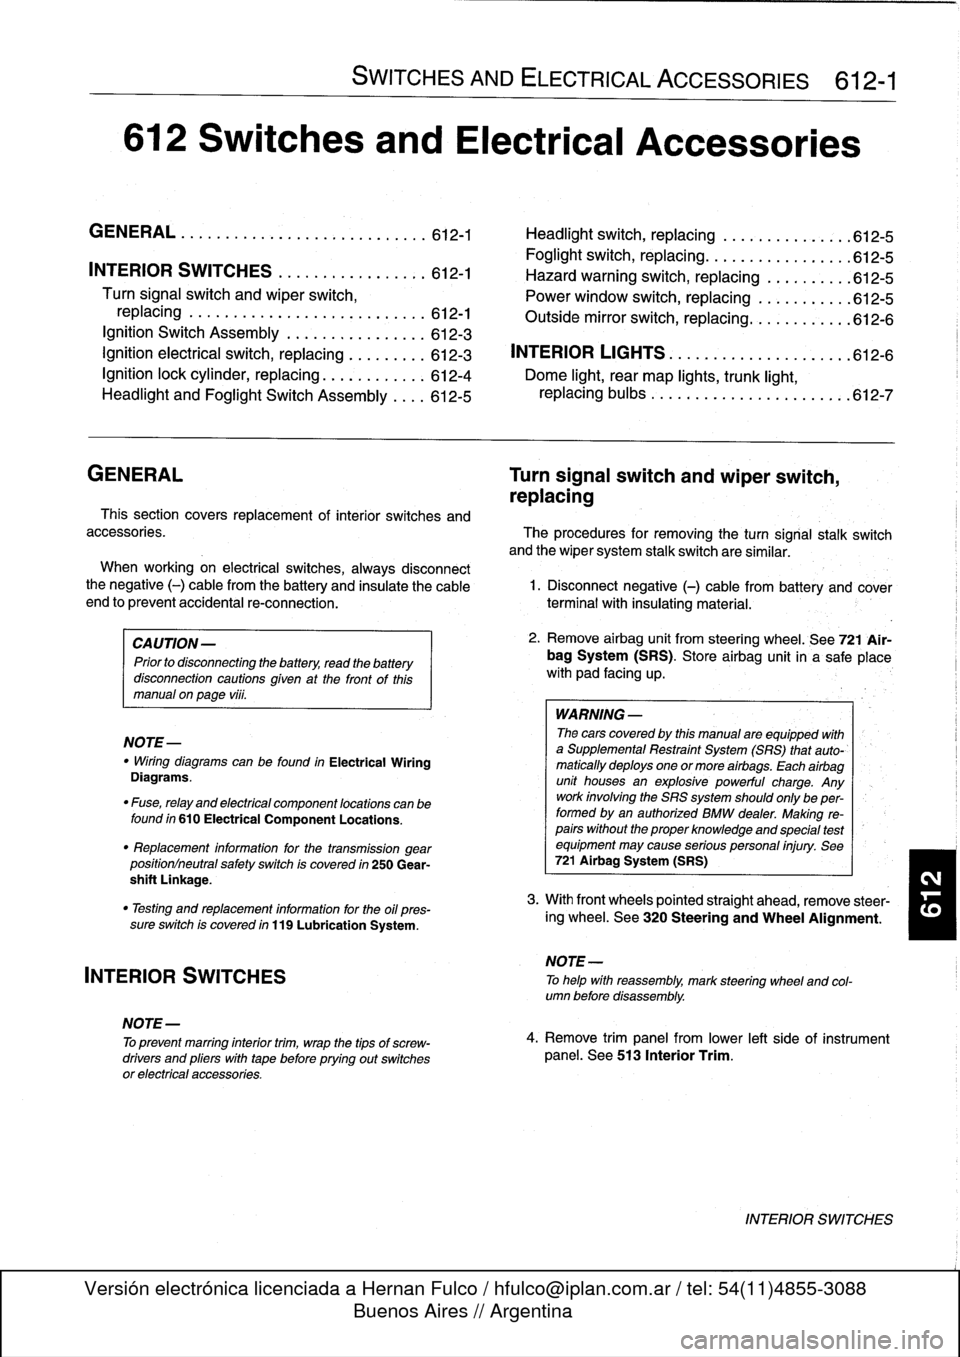 BMW 325i 1996 E36 Workshop Manual 
612
Switches
and
Electrical
Accessories

GENERAL
.
.
.
.
.
.
.
.
.
...
.
.
.
.
.
...
.
......
.612-1

	

Headlight
switch,
replacing

	

..
.
...
.
.
.
.
.
.
.
.
.
612-5

Foglight
switch,
replacing
.